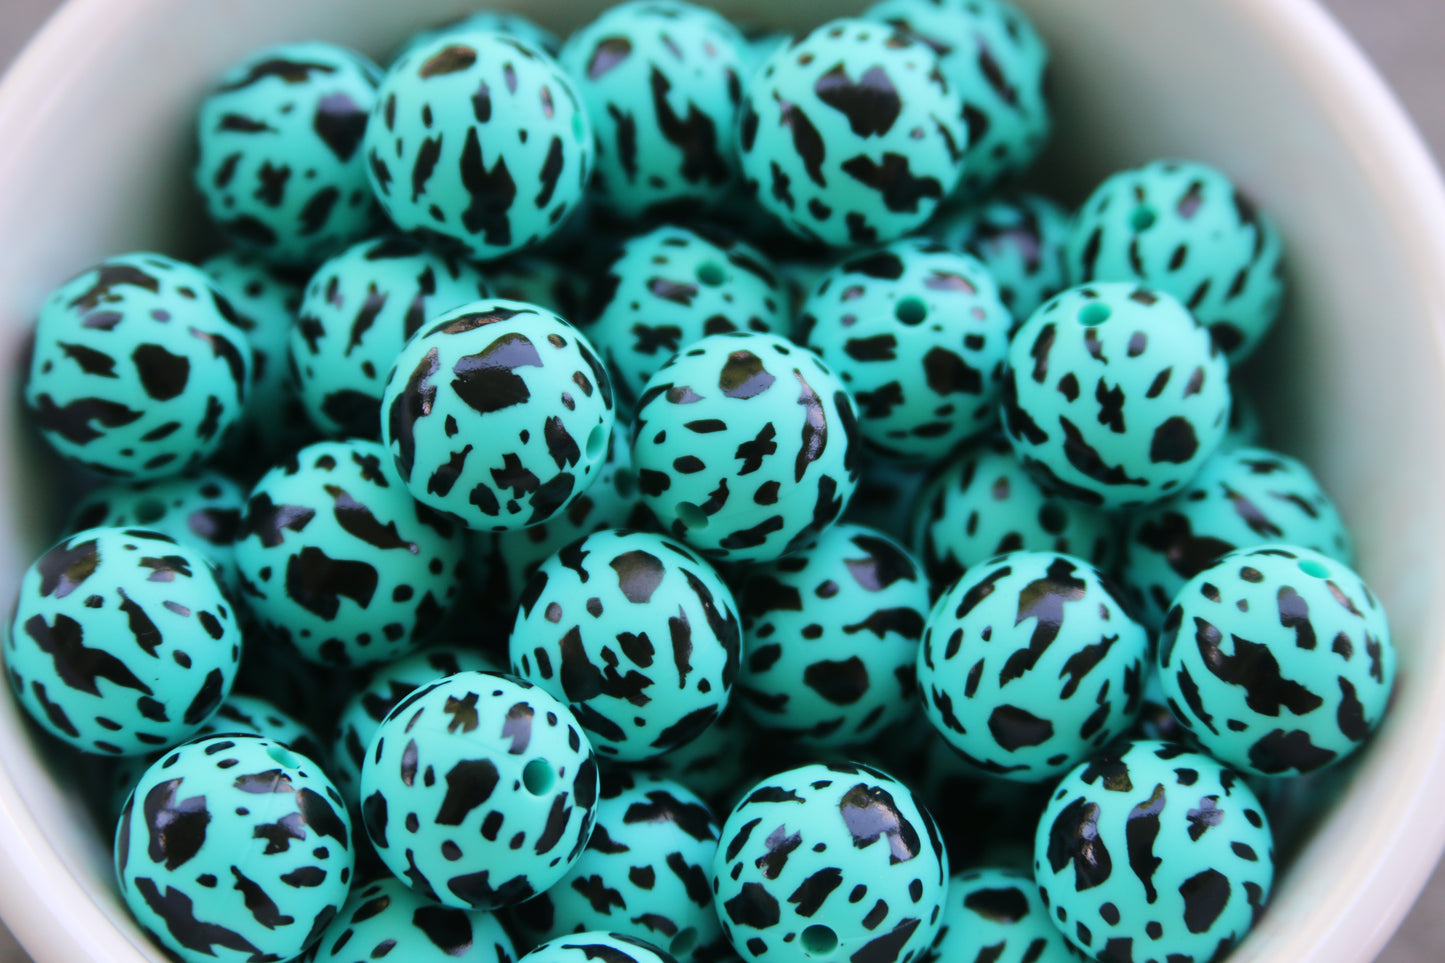 25 count Pattern 15mm Silicone Beads